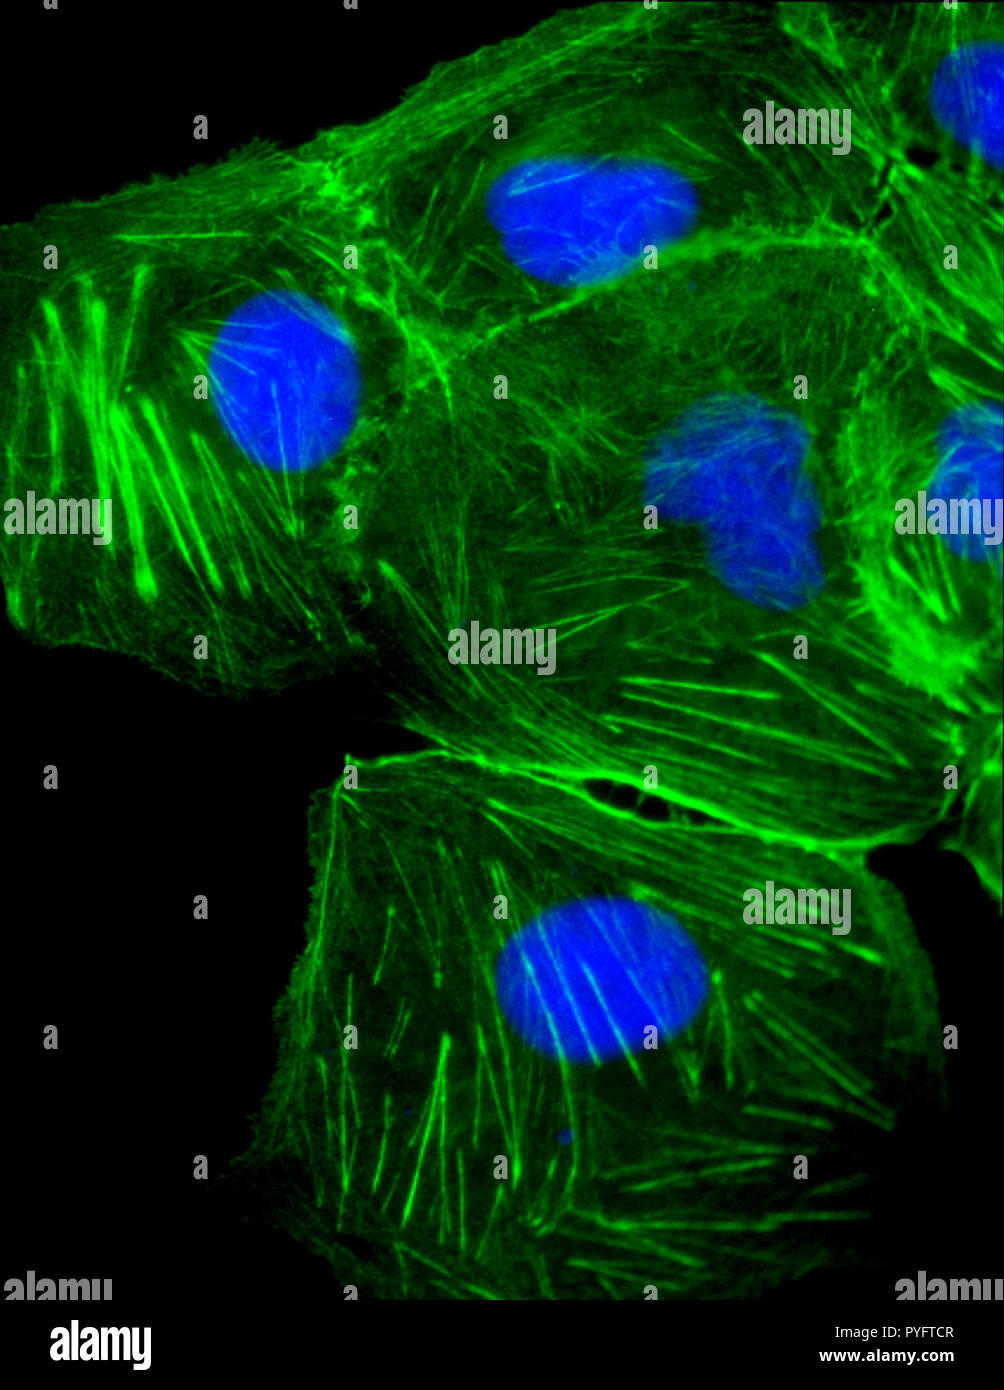 Fluorescent stem cells under confocal microscope DNA stained in blue and actin microtubules in green Stock Photo